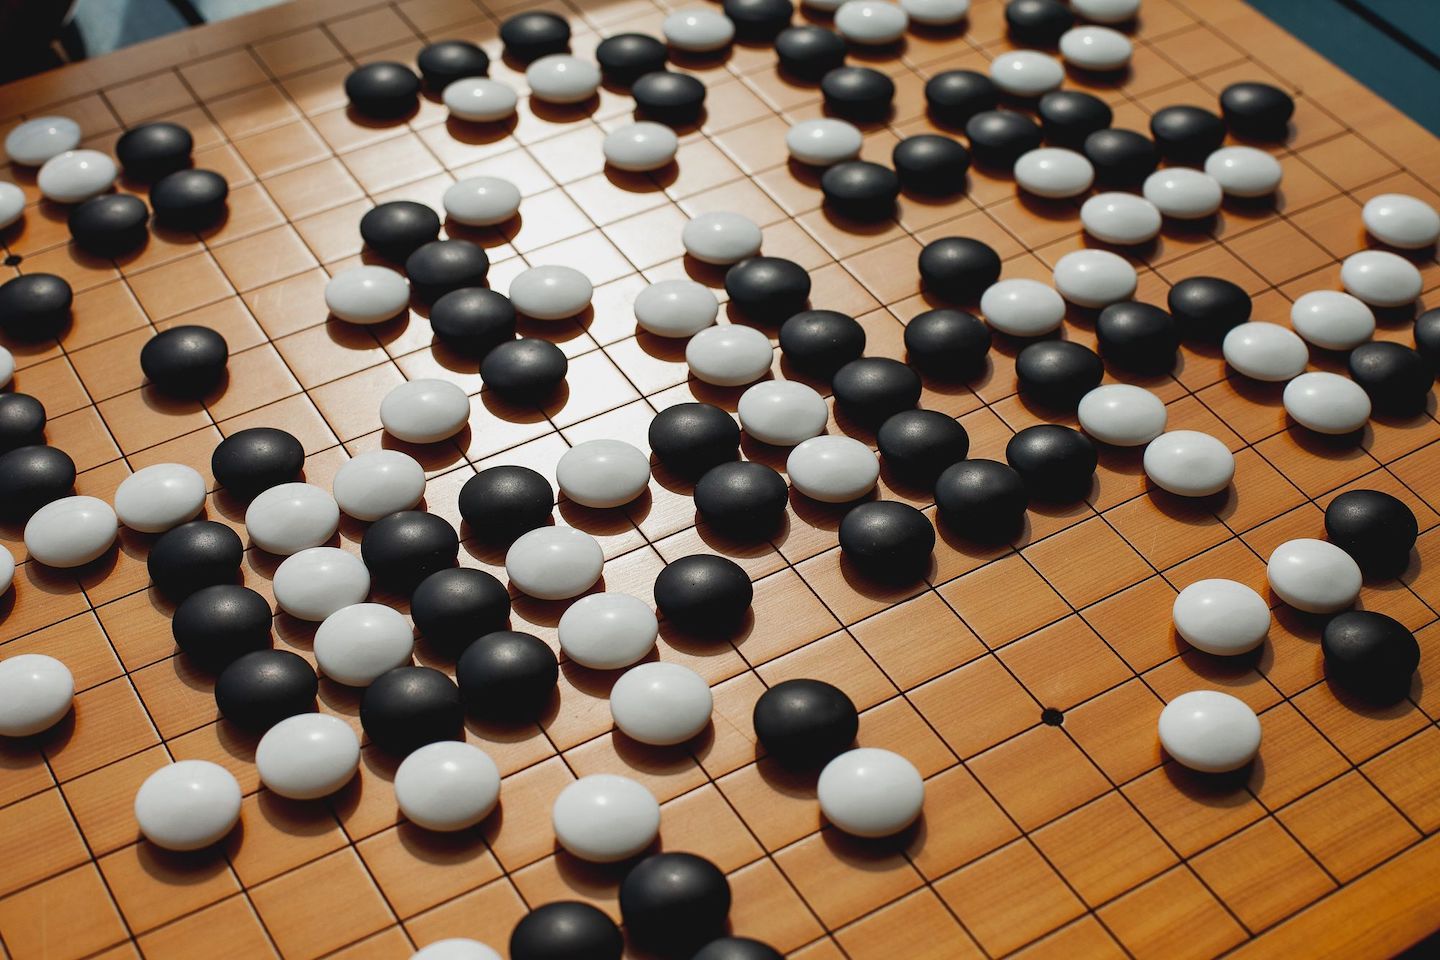 The game of Go as the inspiration for the QR code.